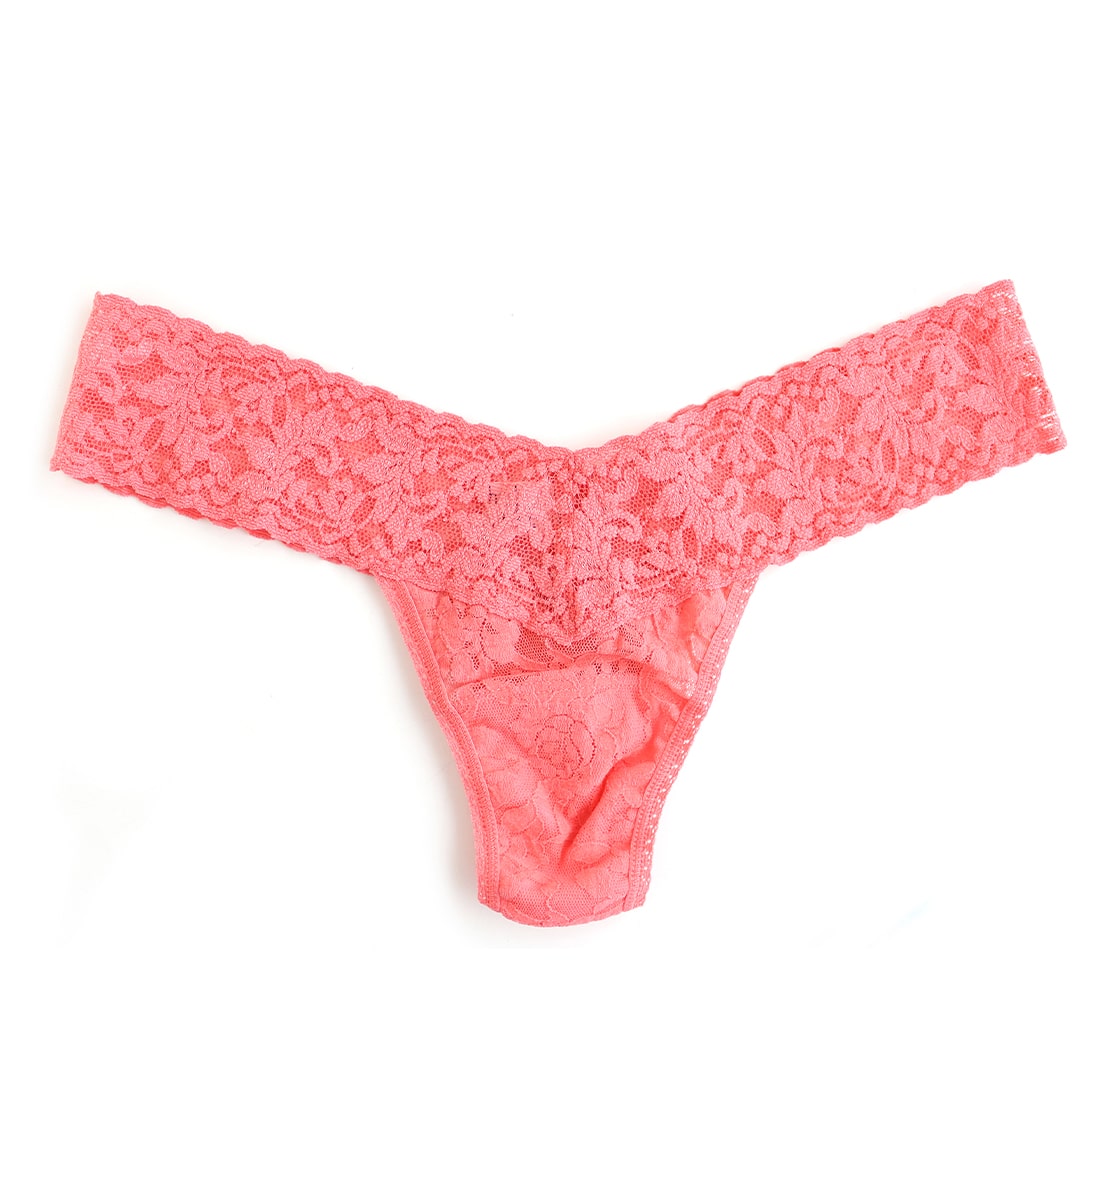 Hanky Panky Signature Lace Low Rise Thong (4911P),Peachy Keen - Peachy Keen,One Size